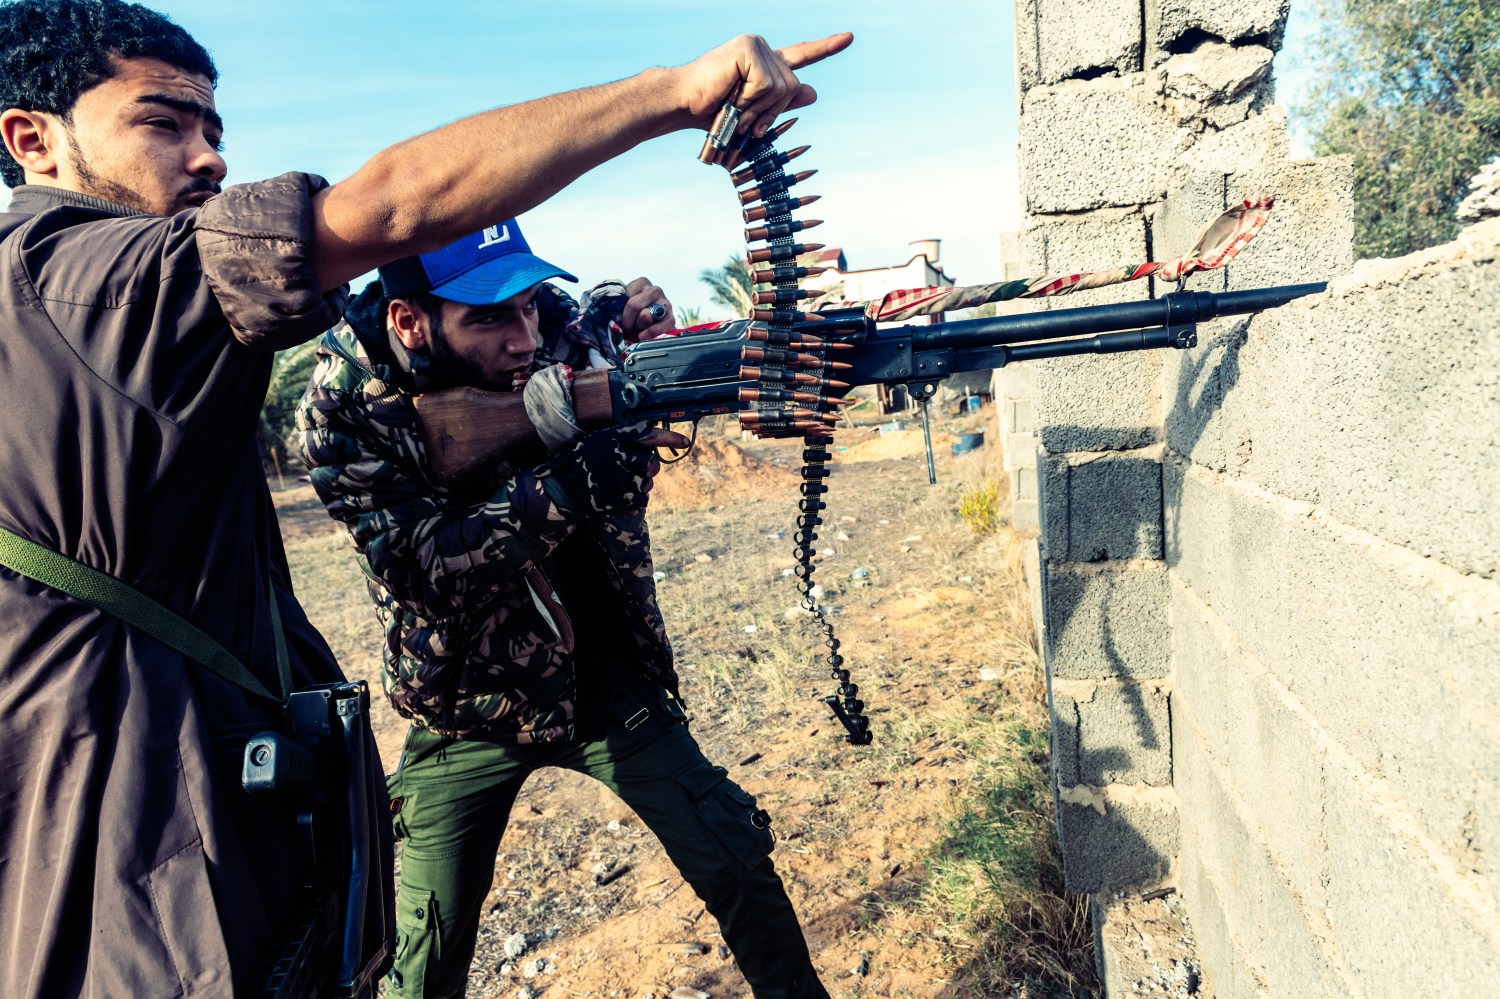 On the front line of Al Swani during the clashes, a fighter of Brigade 610 (GNA) fires with his machine-gun while his comrade points his finger towards the enemy. Since April, the Libyan National Army (LNA) led by Khalifa Haftar is attempting to take control of Tripoli defended by the forces of UN-backed recognised Government of National Accord of Fayez el-Sarraj (GNA). Libya, outskirts of Tripoli, December 6, 2019. Sur la ligne de front de Al Swani pendant les affrontements, un combattant de la brigade 610 (GAN) tire avec sa mitraille alors que son camarade pointe du doigt l'ennemi. Depuis avril, l'armee nationale Libyenne (LNA) dirigee par Khalifa Haftar essaie de prendre le control de Tripoli defendu par les forces du gouvernement d'accord national de Fayez al-Sarraj, soutenu par l'onu (GAN). Libye, banlieue de Tripoli, 6 decembre 2019.NO USE FRANCE